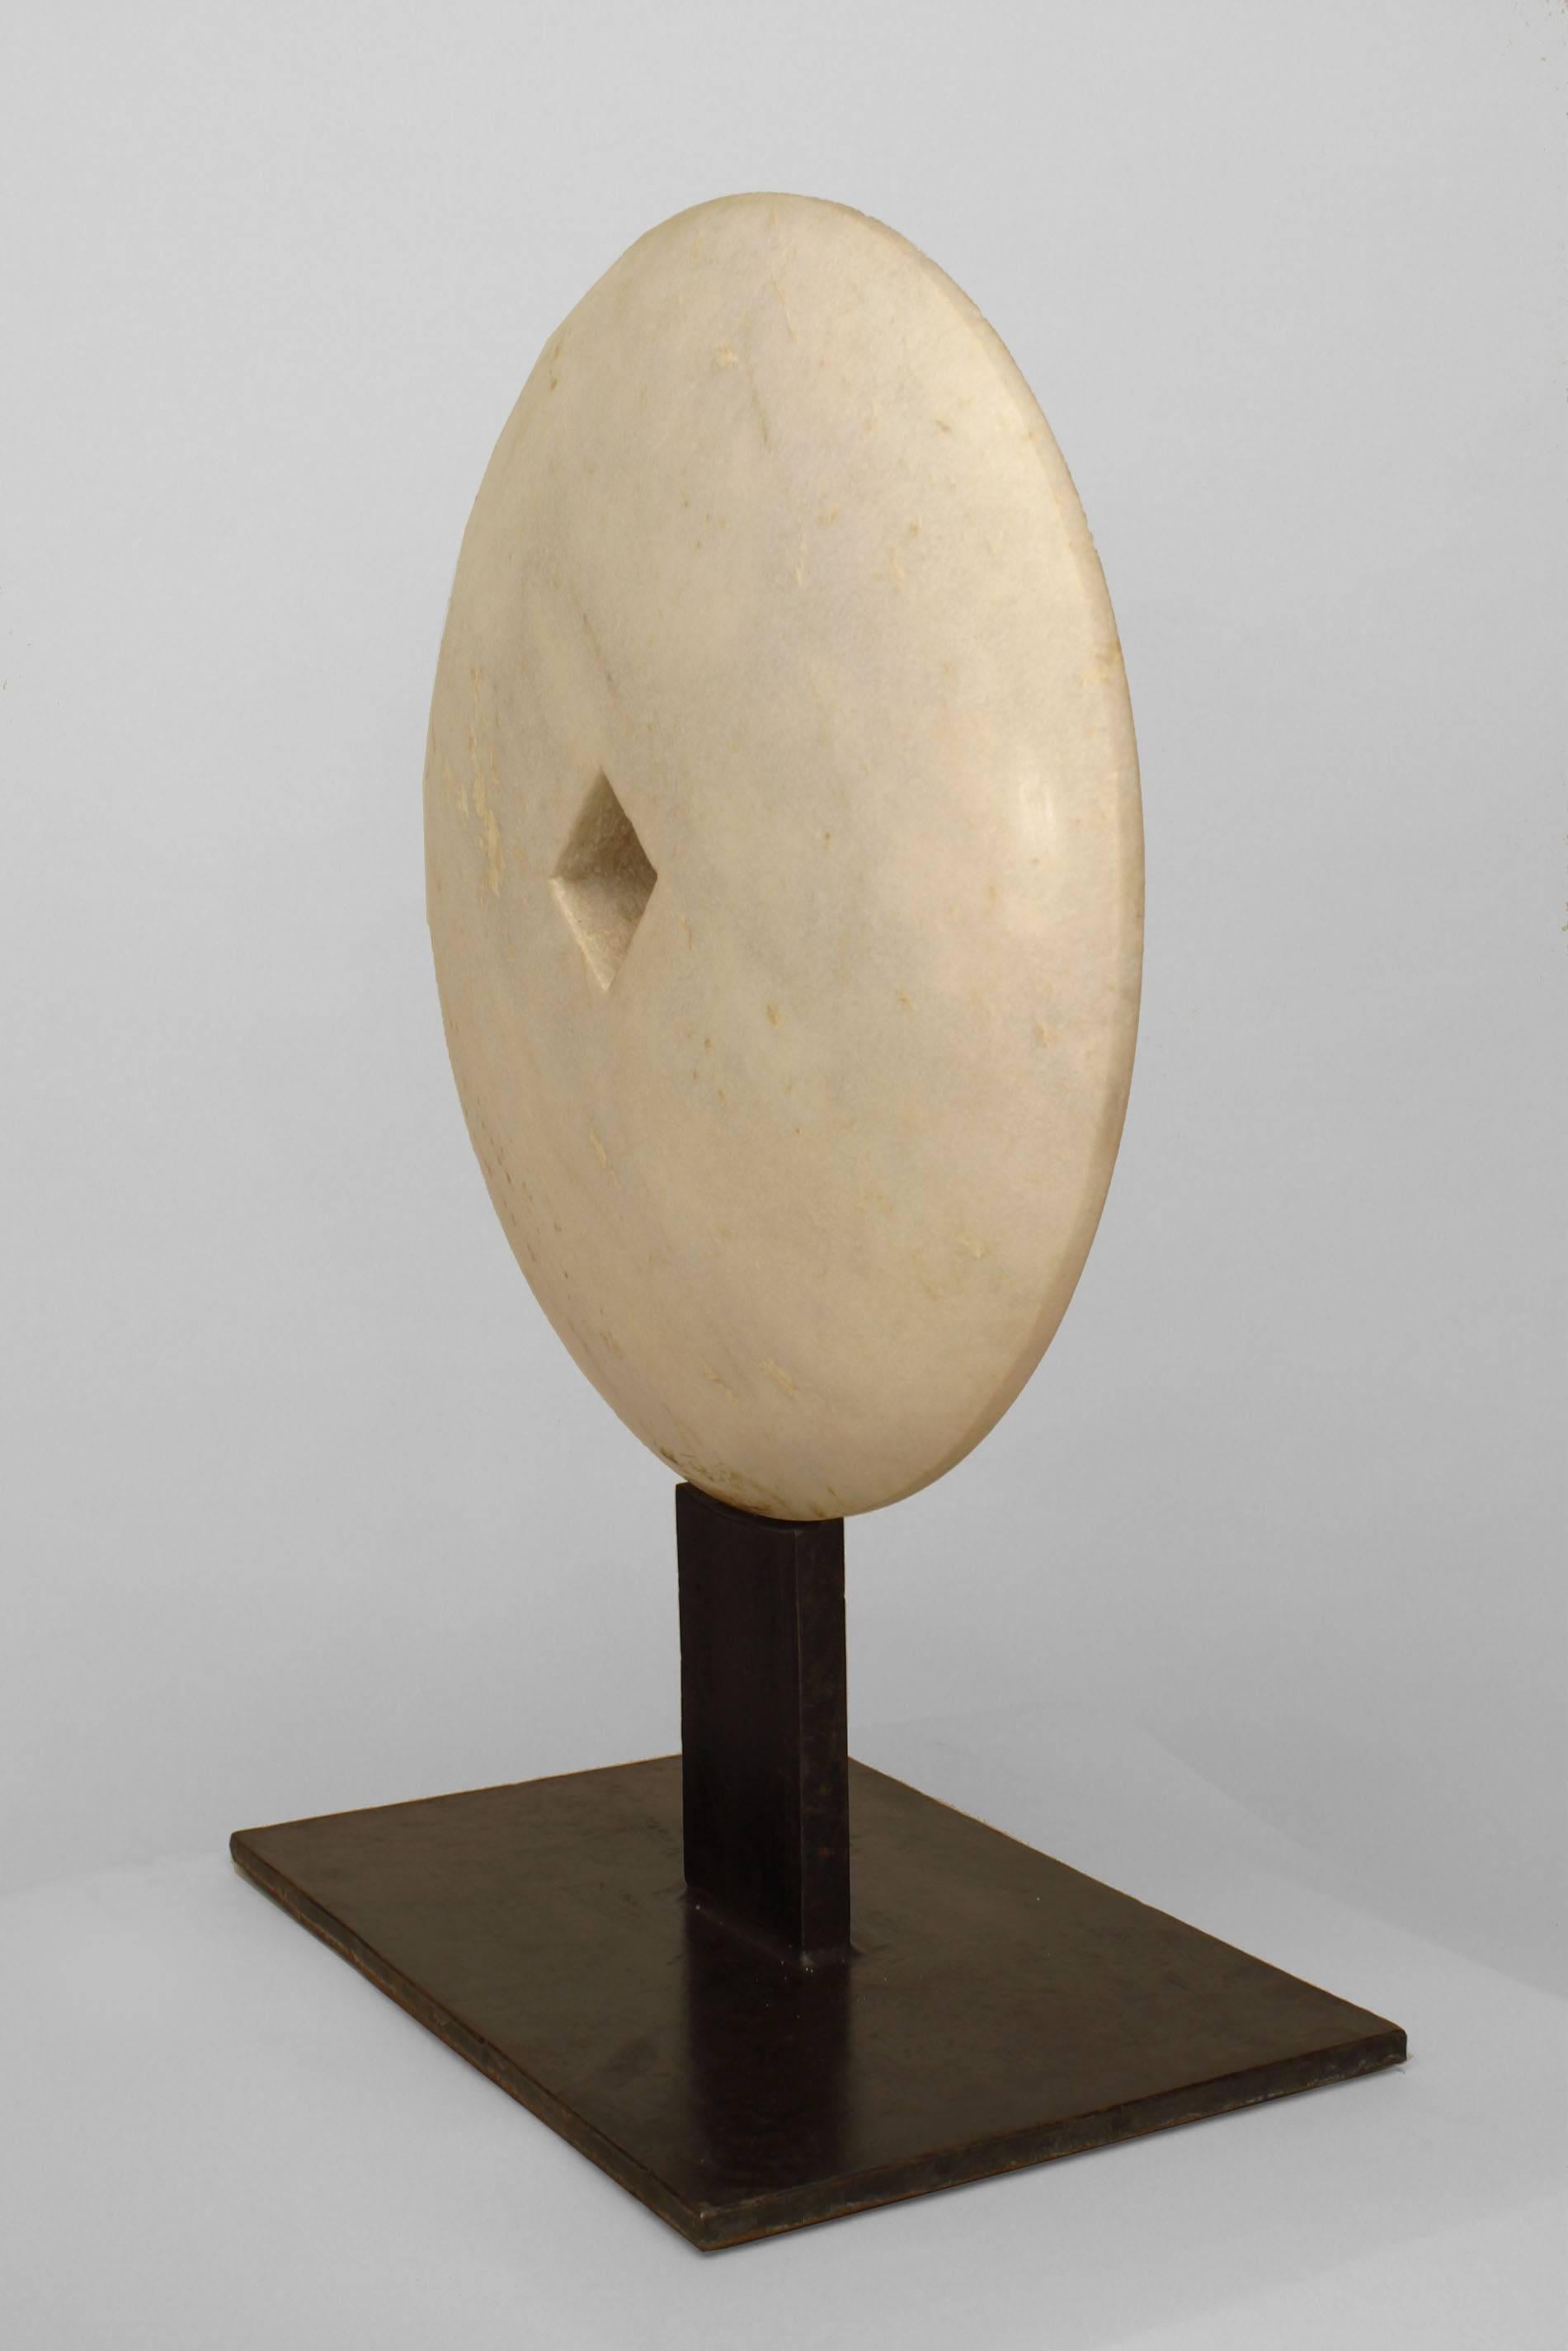 American Post-War Design style abstract sculpture of light grey marble disc with a cut-out square center mounted on a rectangular iron base. (modern)
